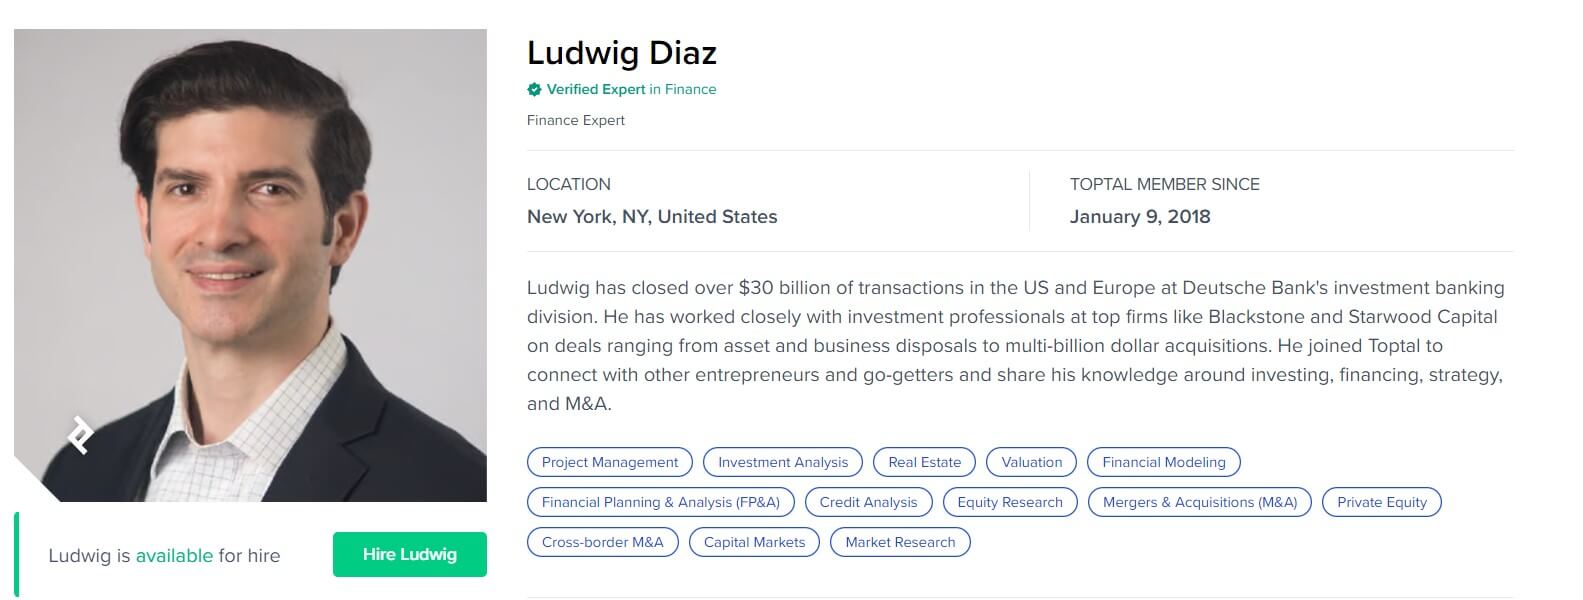 Financial Modeling Consultant - Ludwig Diaz